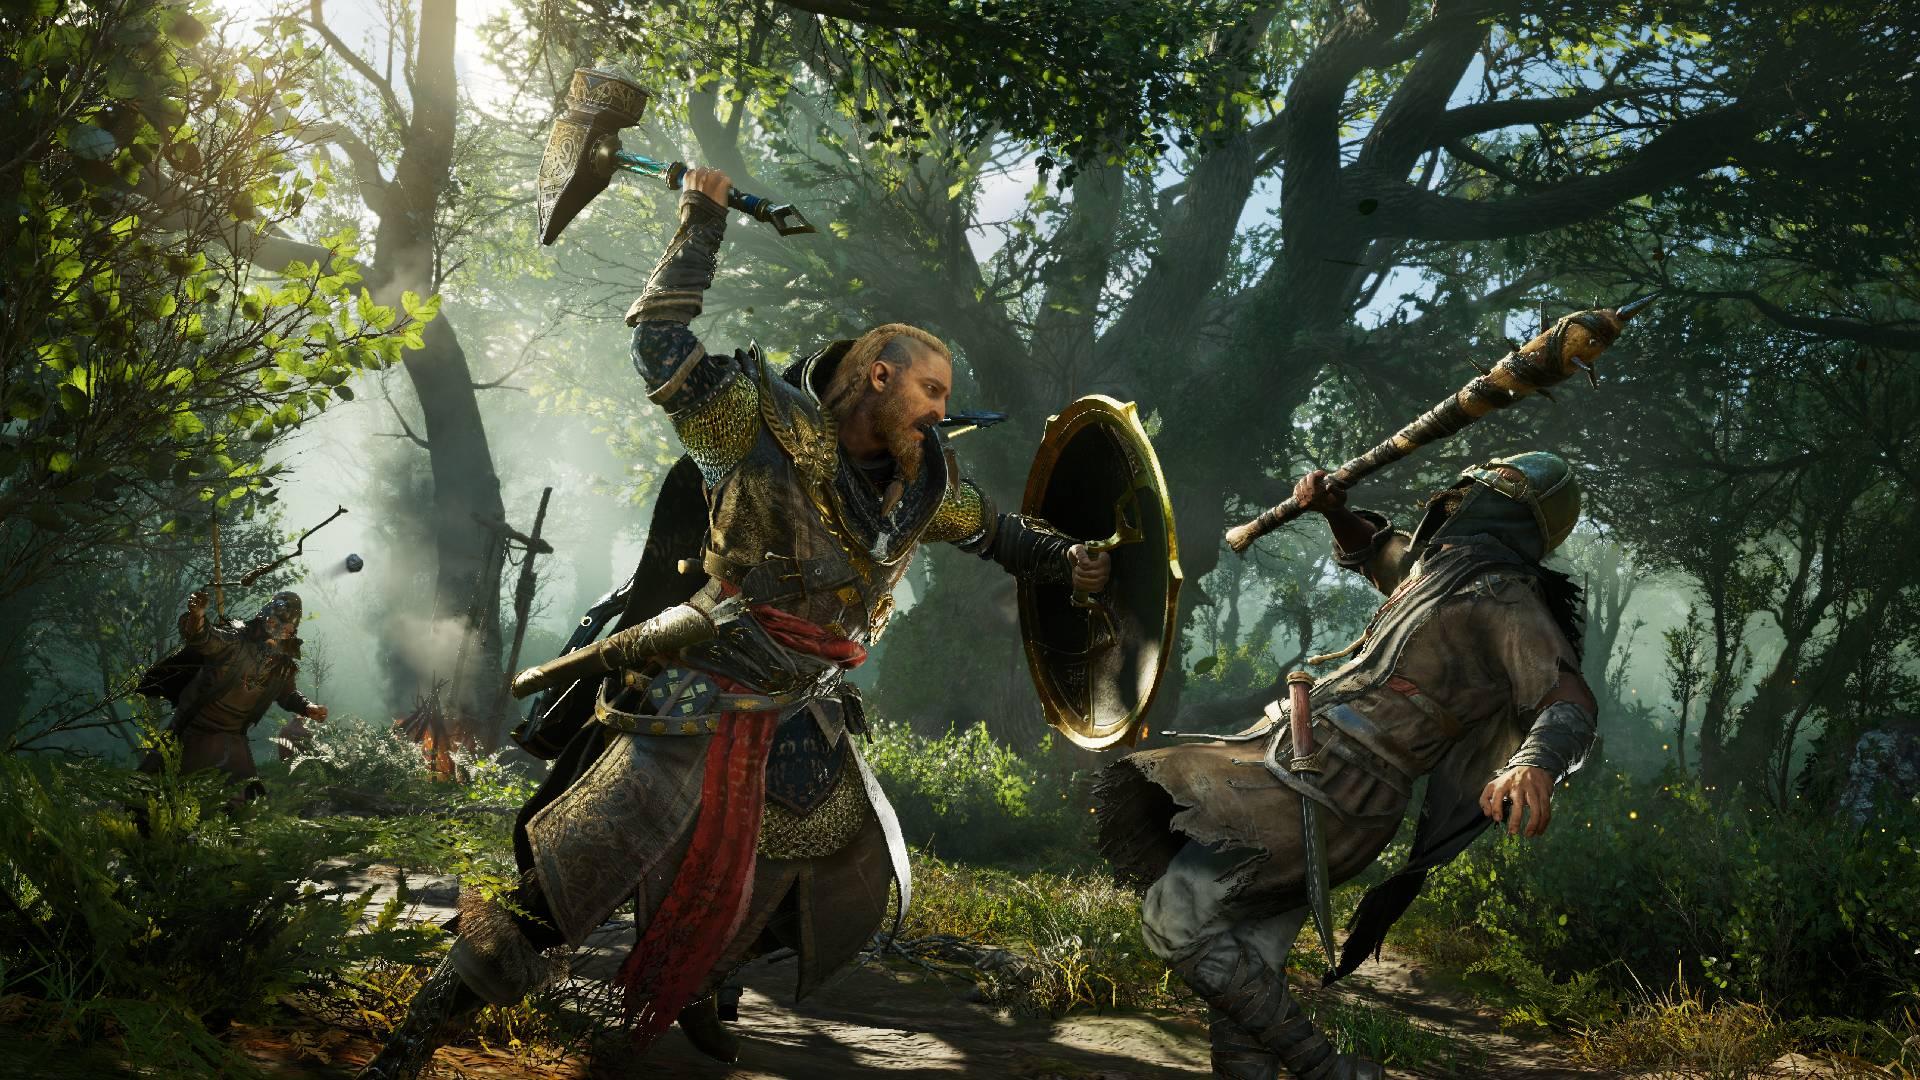 Assassin's Creed Valhalla System Requirements Outed